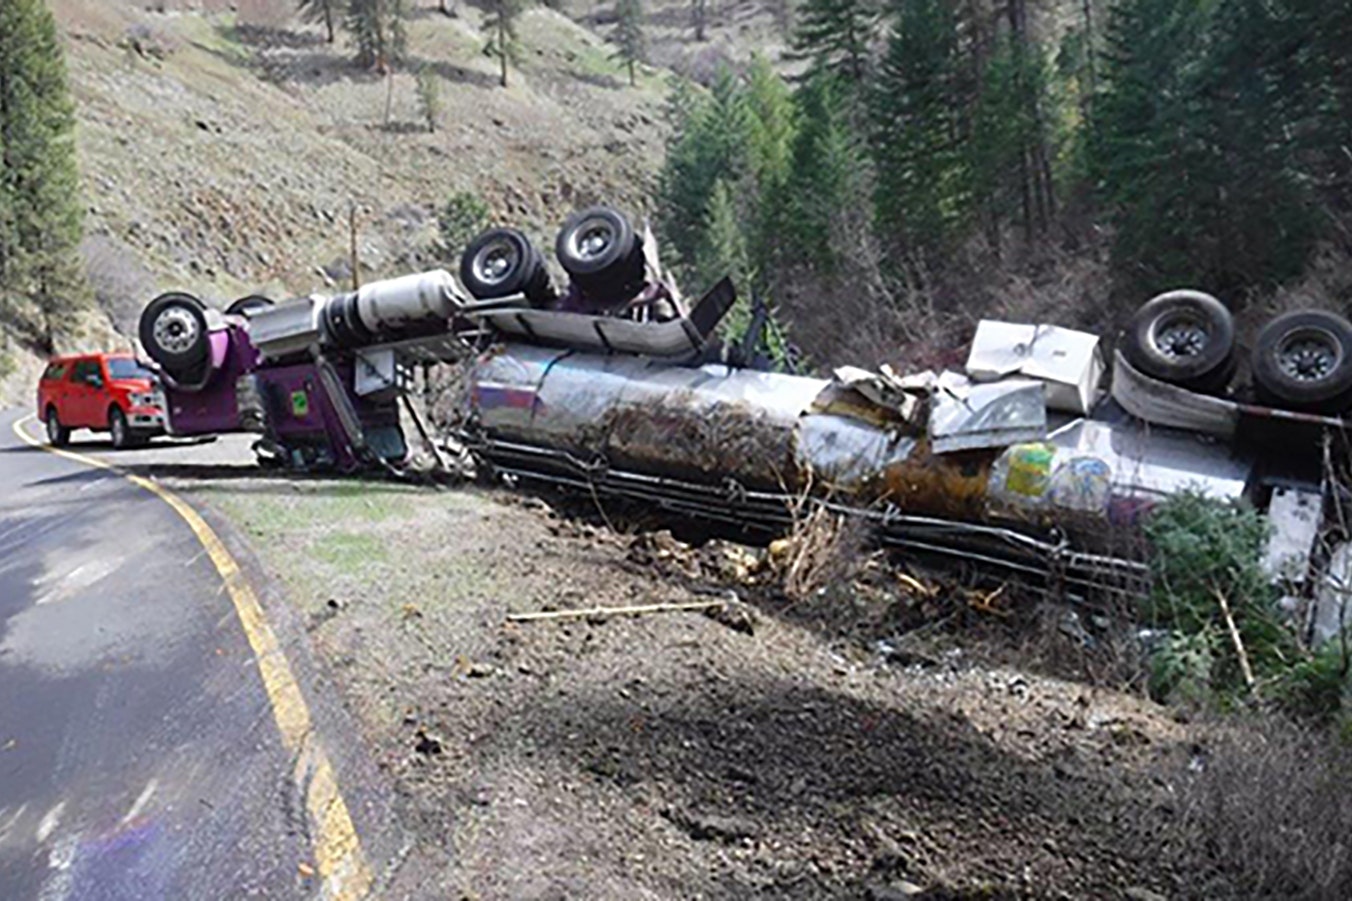 A tanker truck carrying 102,000 salmon smolts (young fish) crashed in Oregon. About 25,000 fish died in the crash, but the rest made it into a nearby creek.